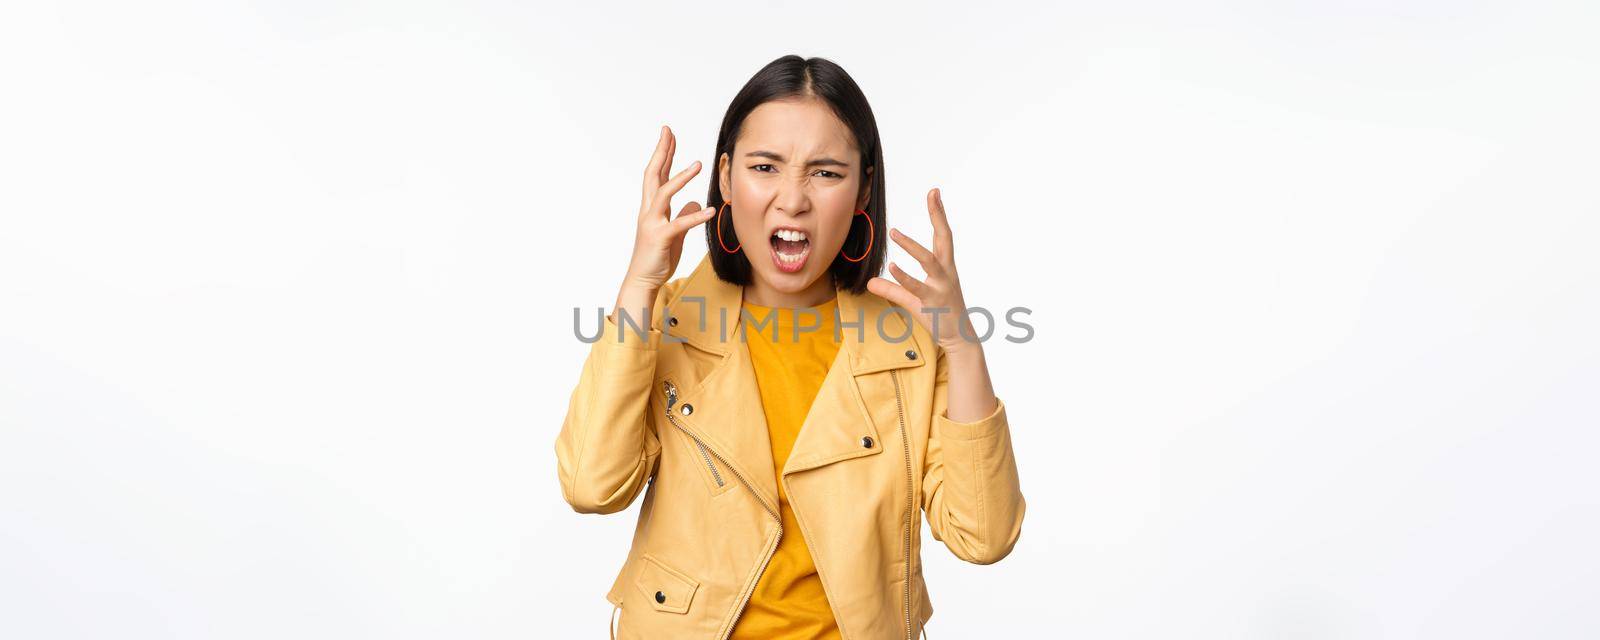 Asian angry woman arguing, shaking hands angry and screaming, shouting with frustrated face, standing over white background.